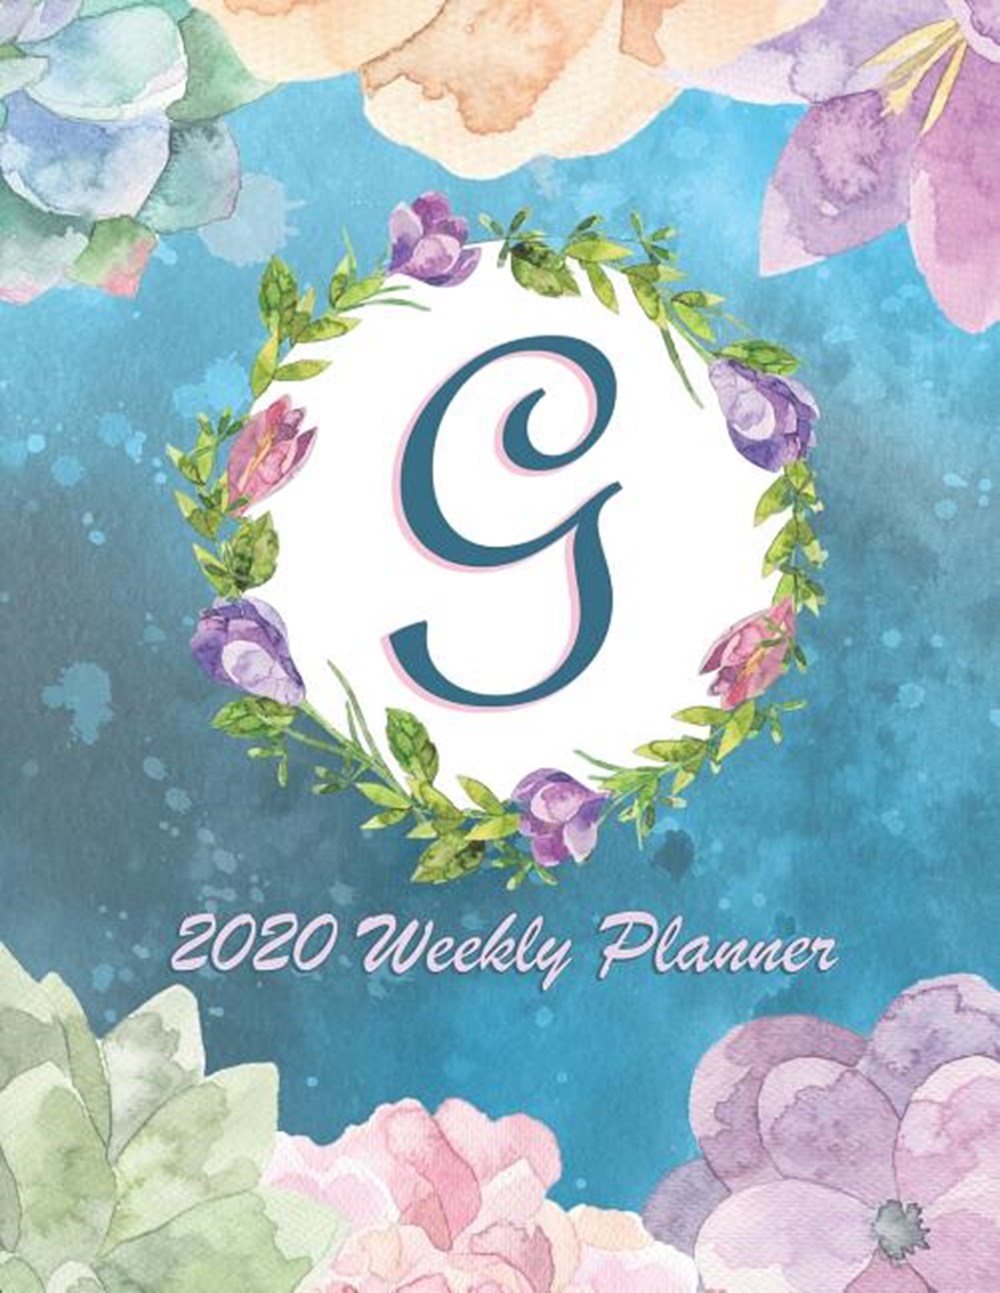 G - 2020 Weekly Planner Watercolor Monogram Handwritten Initial G with Vintage Retro Floral Wreath E